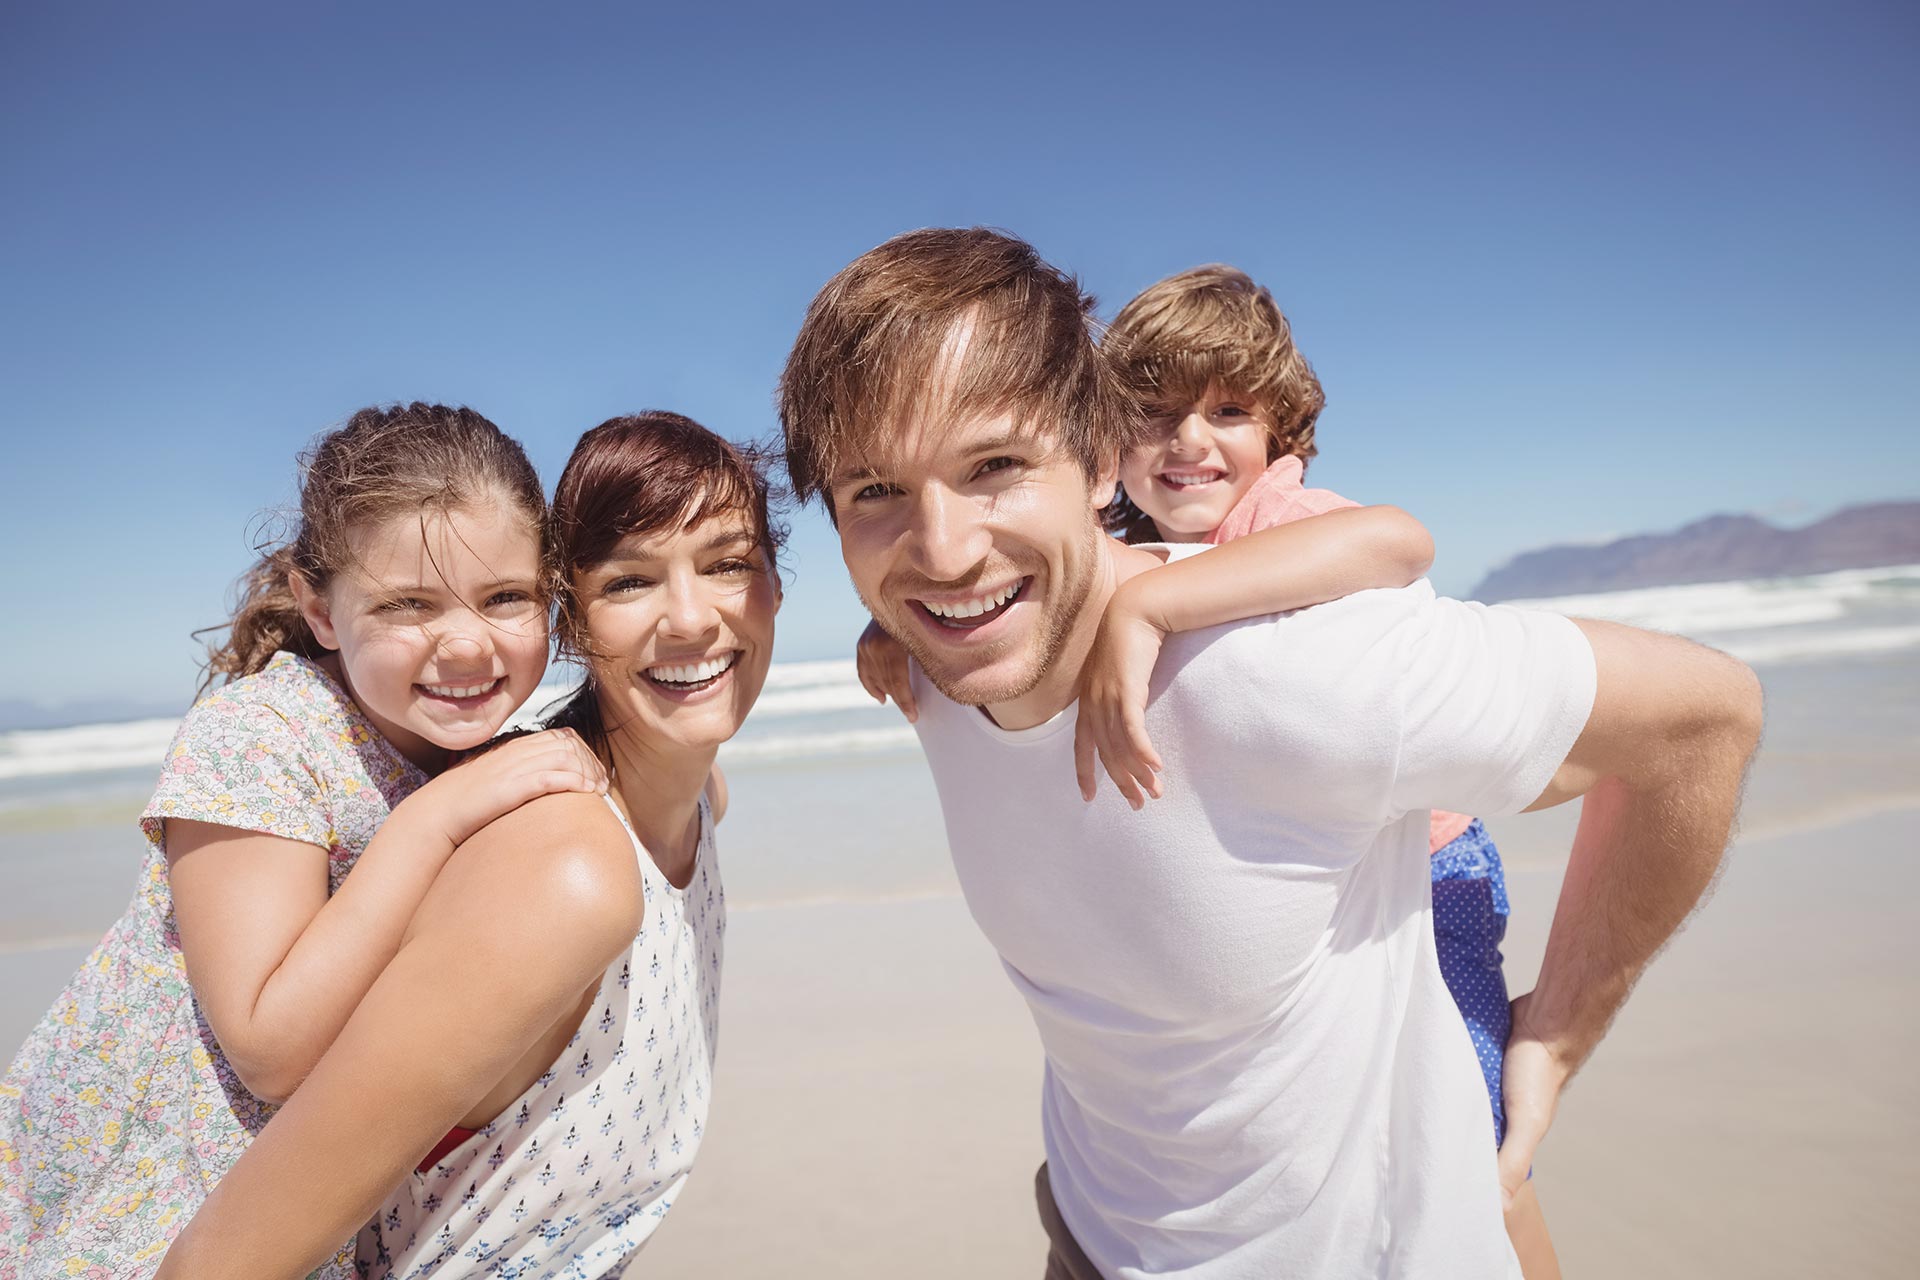 portrait of family smiling together at beach ZHKPVJJ